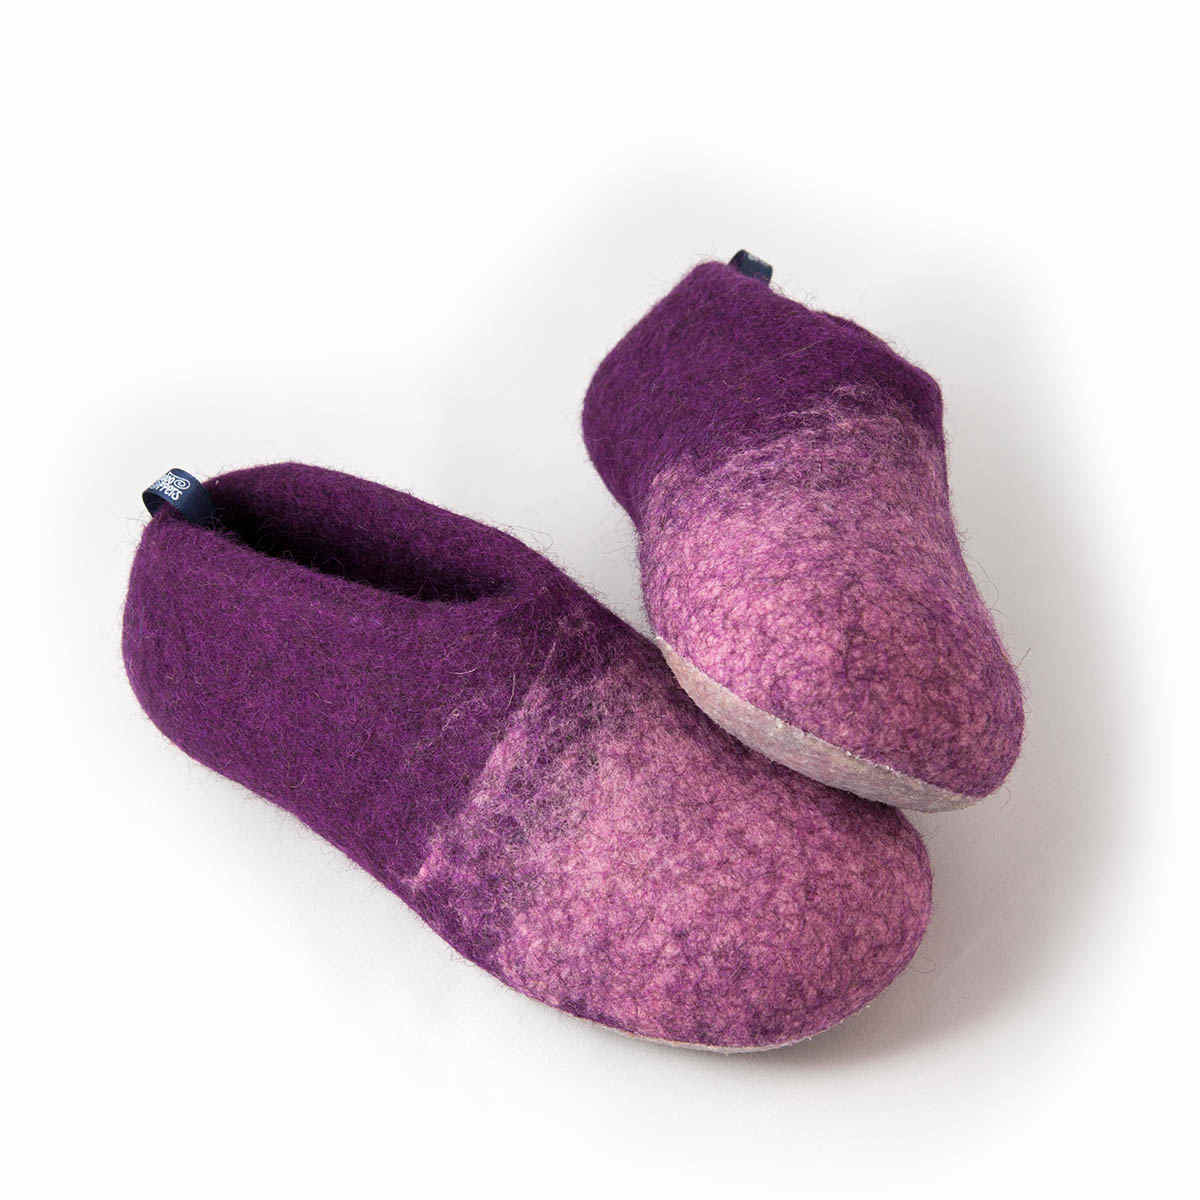 Kids felt wool slippers in purple - DUO collection by Wooppers